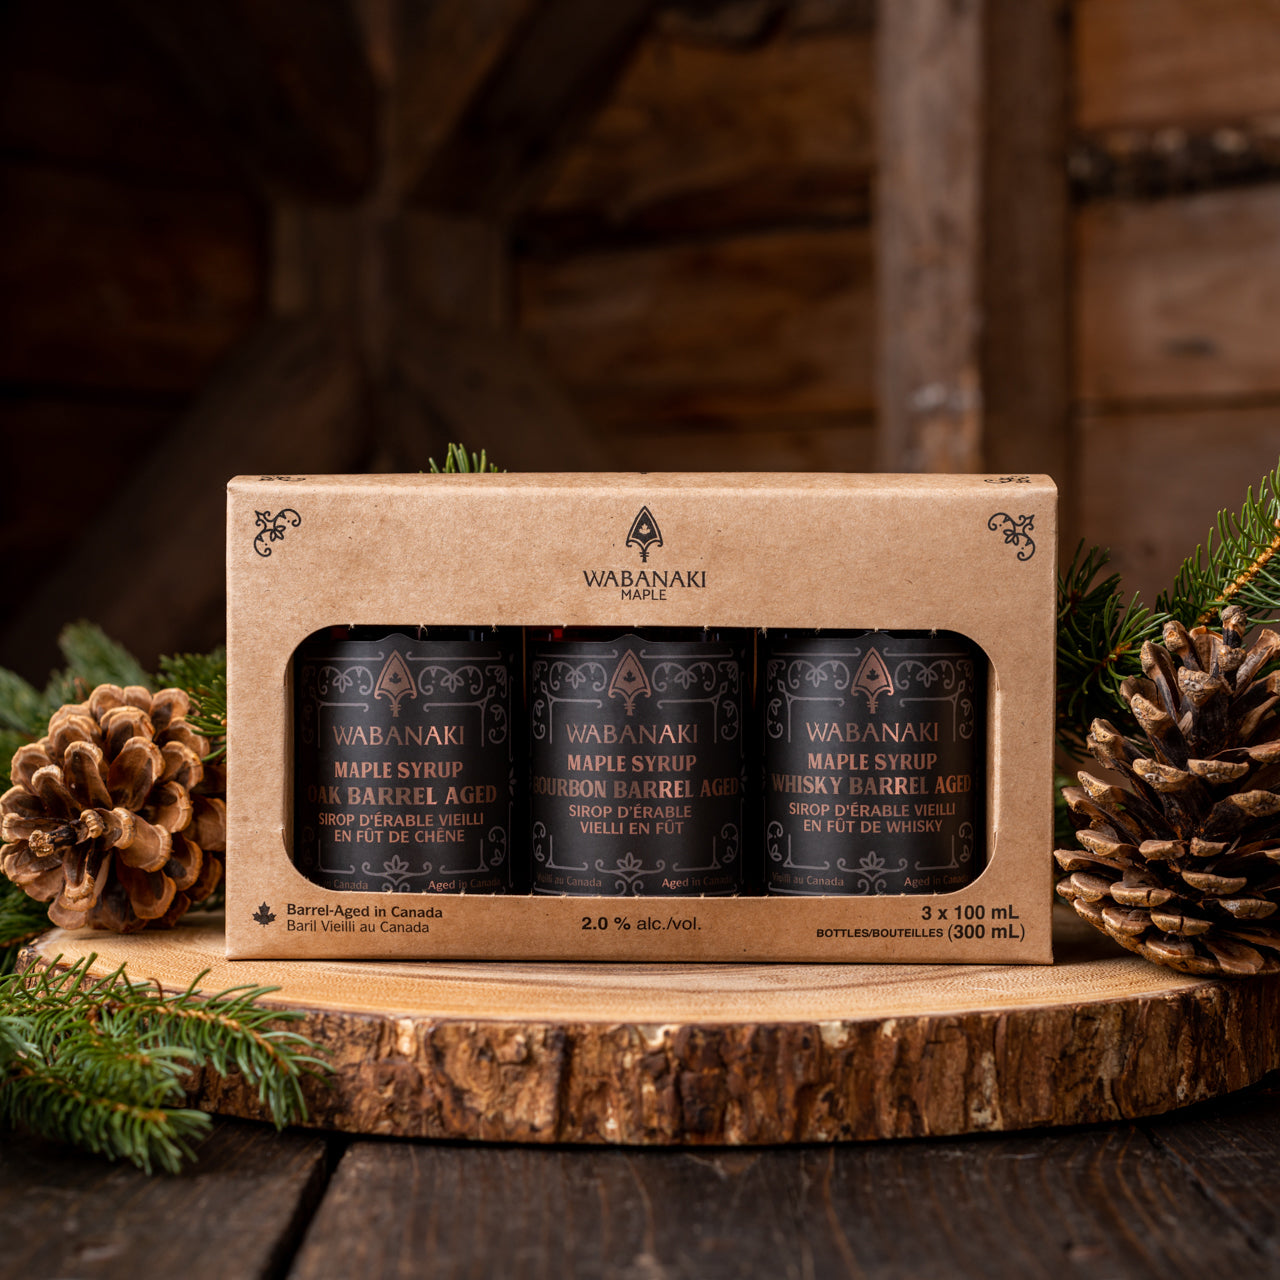 Pictured is the mini bundle set from Wabanaki Maple. This set features bourbon, whiskey and oak barrel aged maple syrup